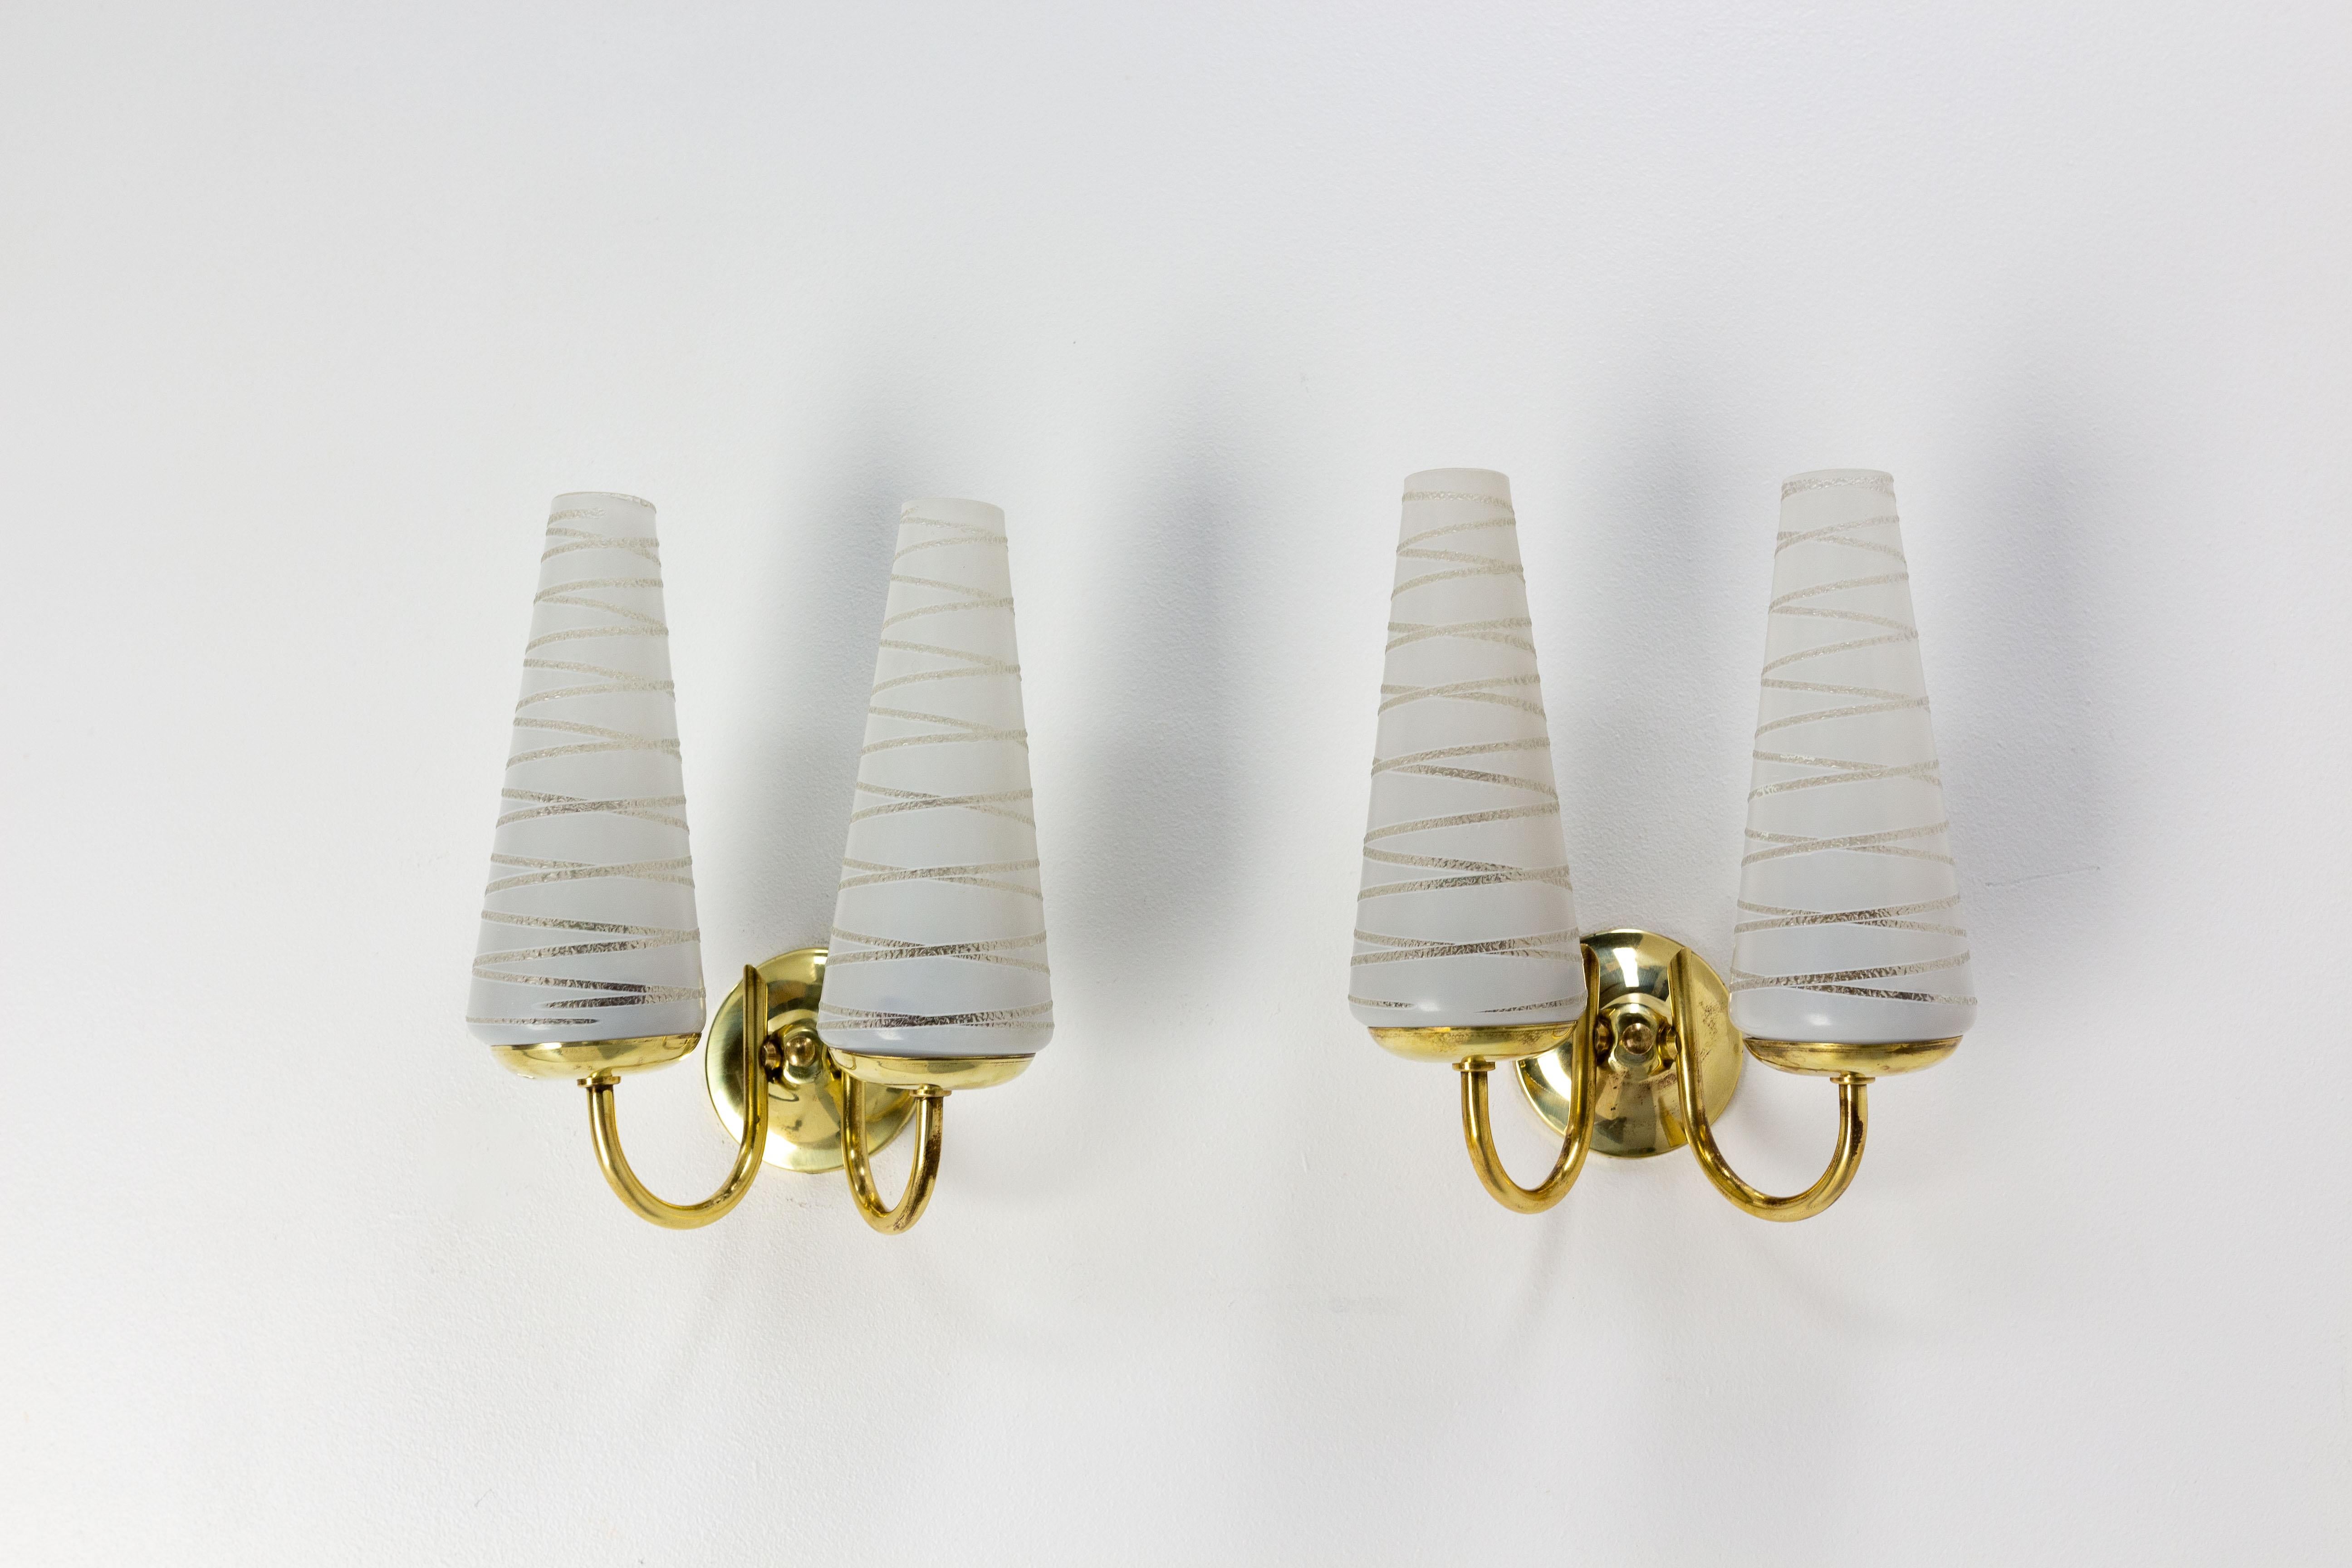 French wall sconces pair of lights
Brass and glass wall lights
Made circa 1960

Good condition

Shipping:40/12/21 1Kg